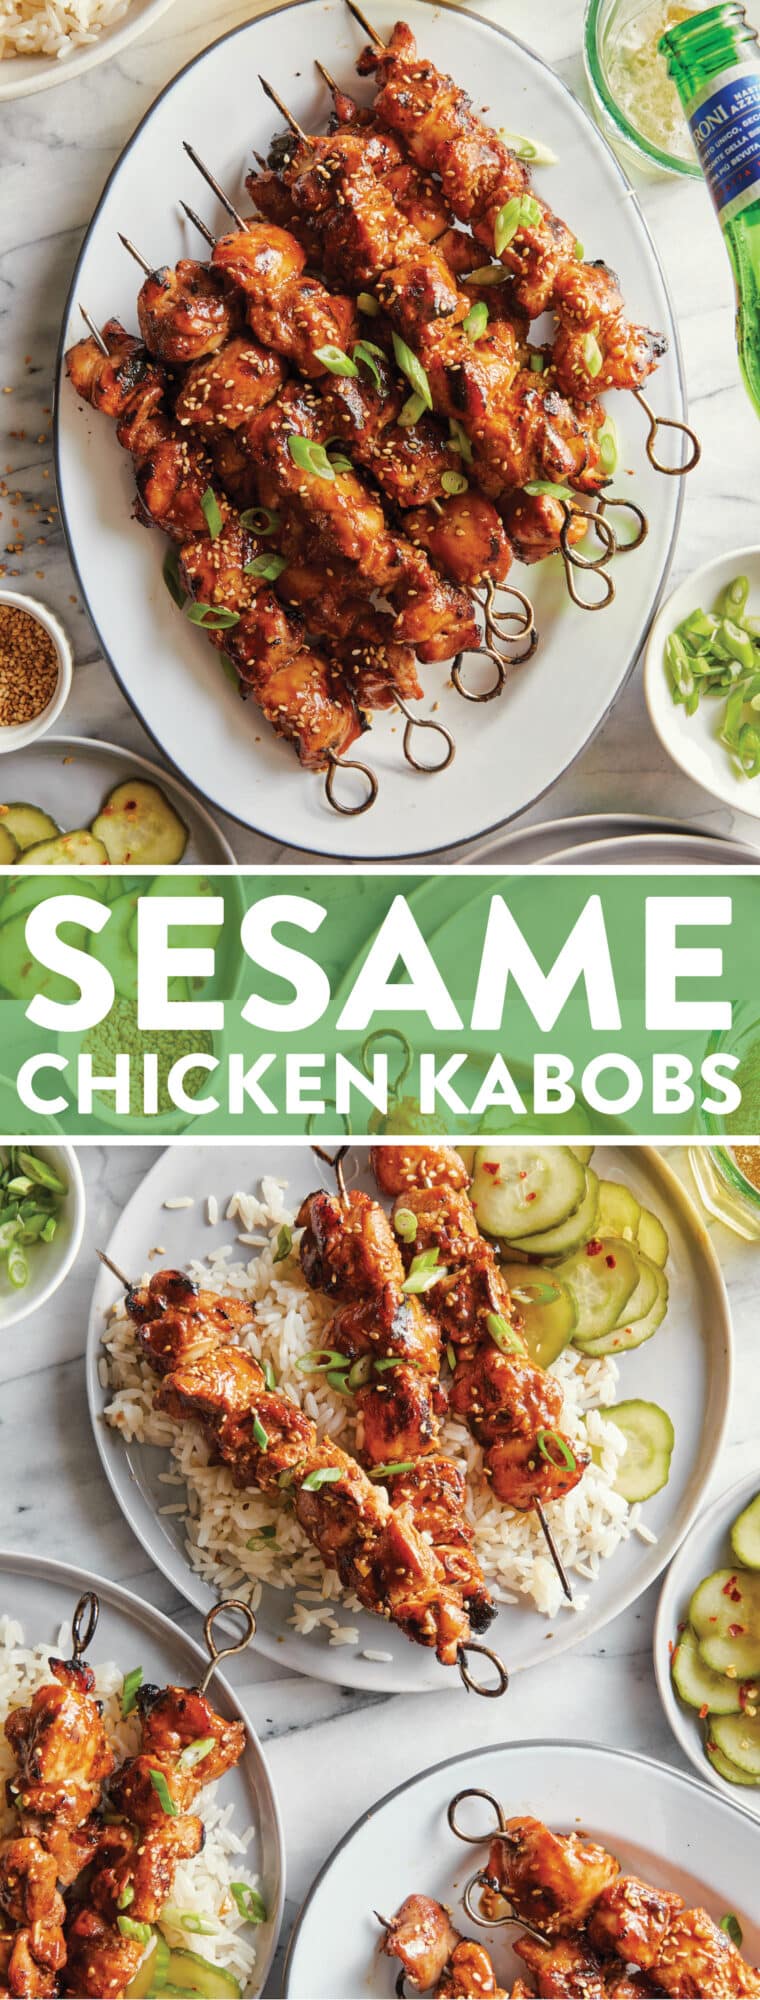 Sesame Chicken Kabobs - Oh-so-sweet, savory, sticky chicken kabobs with the most flavorful marinade. Can be prepped ahead of time. SO SO EASY!